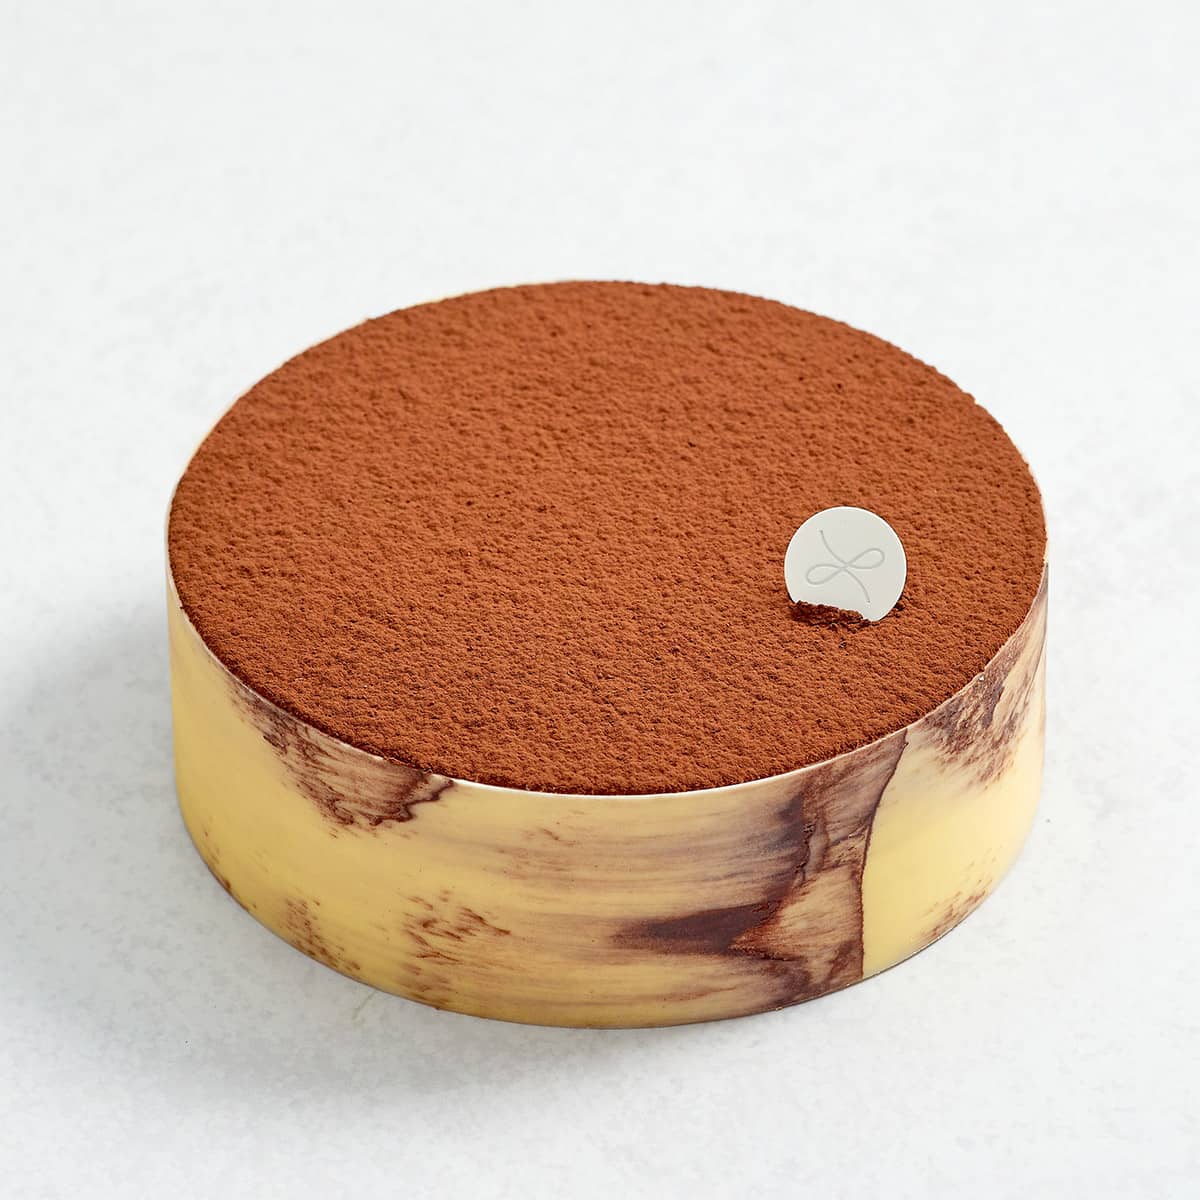 A classic tiramisu cake with a white chocolate collar dusted in cocoa powder with a lacher patisserie logo insert.